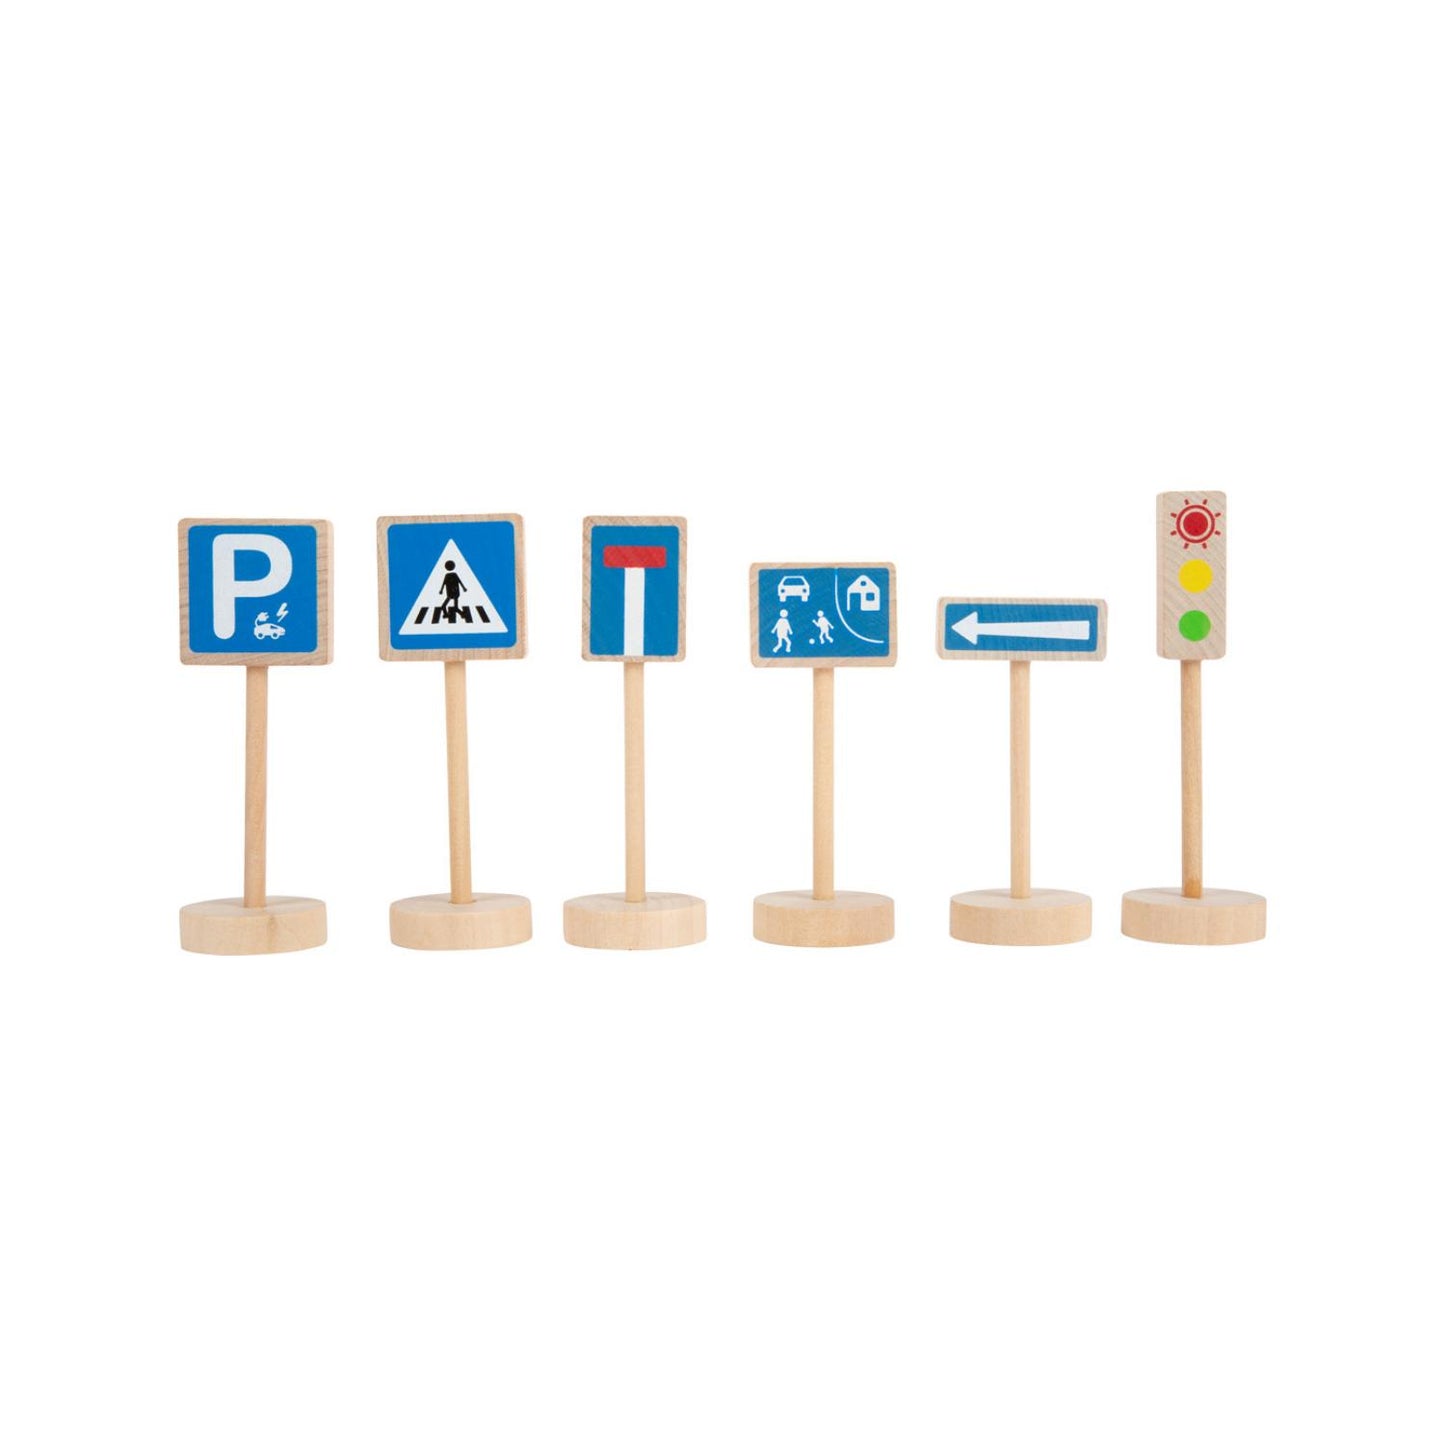 Toy Road Signs | 25 Pieces | Wooden Toys for Kids